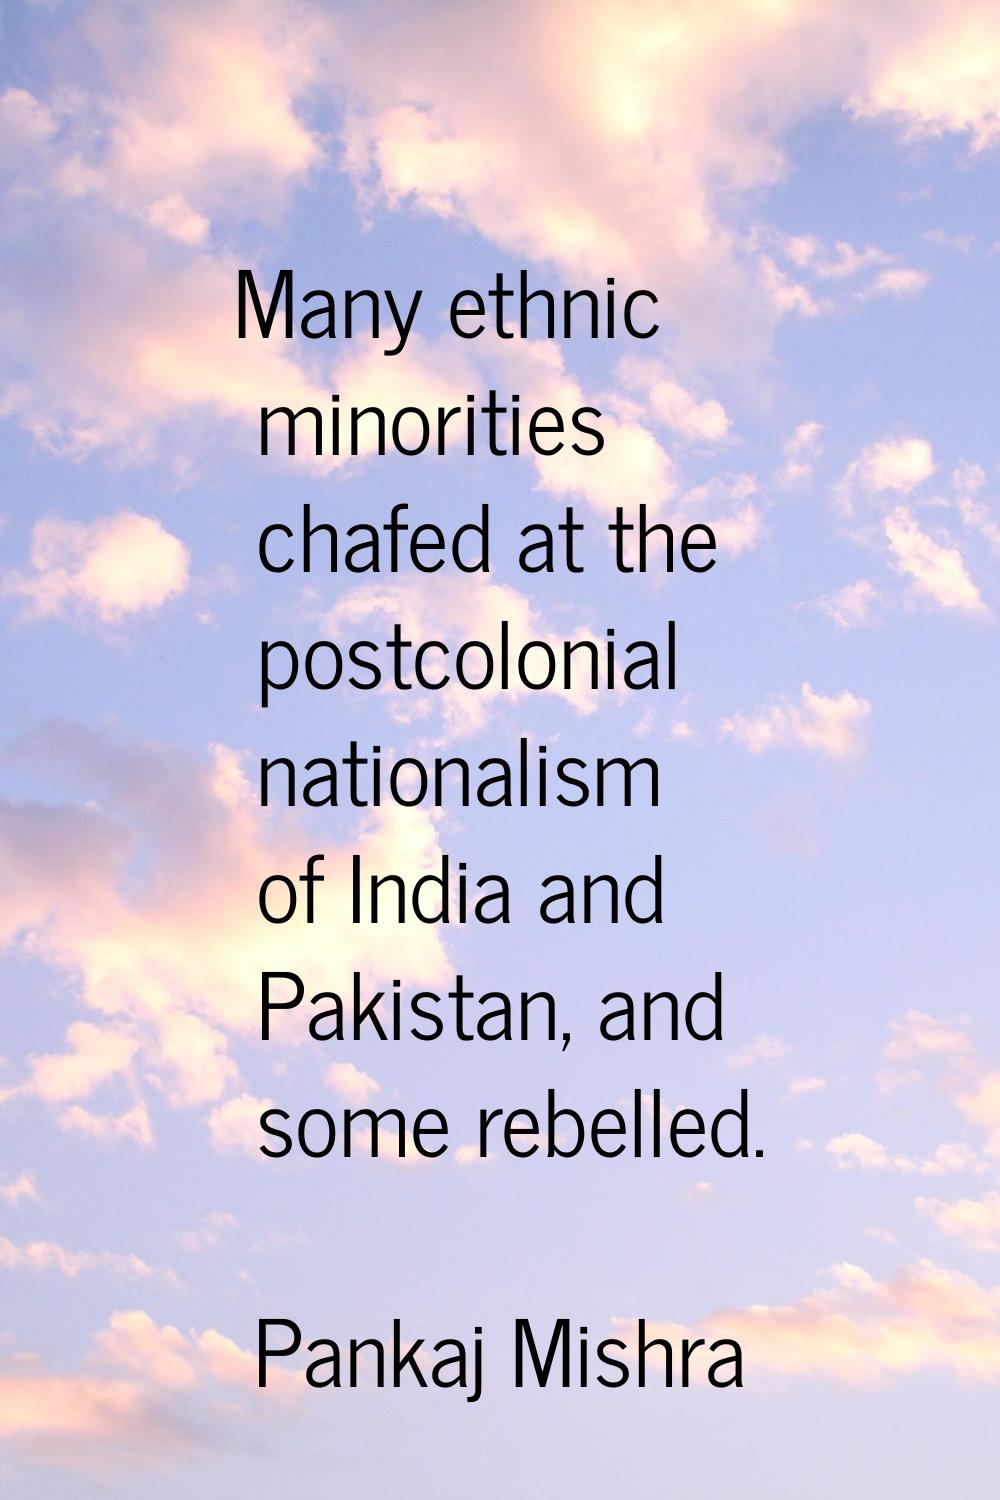 Many ethnic minorities chafed at the postcolonial nationalism of India and Pakistan, and some rebel